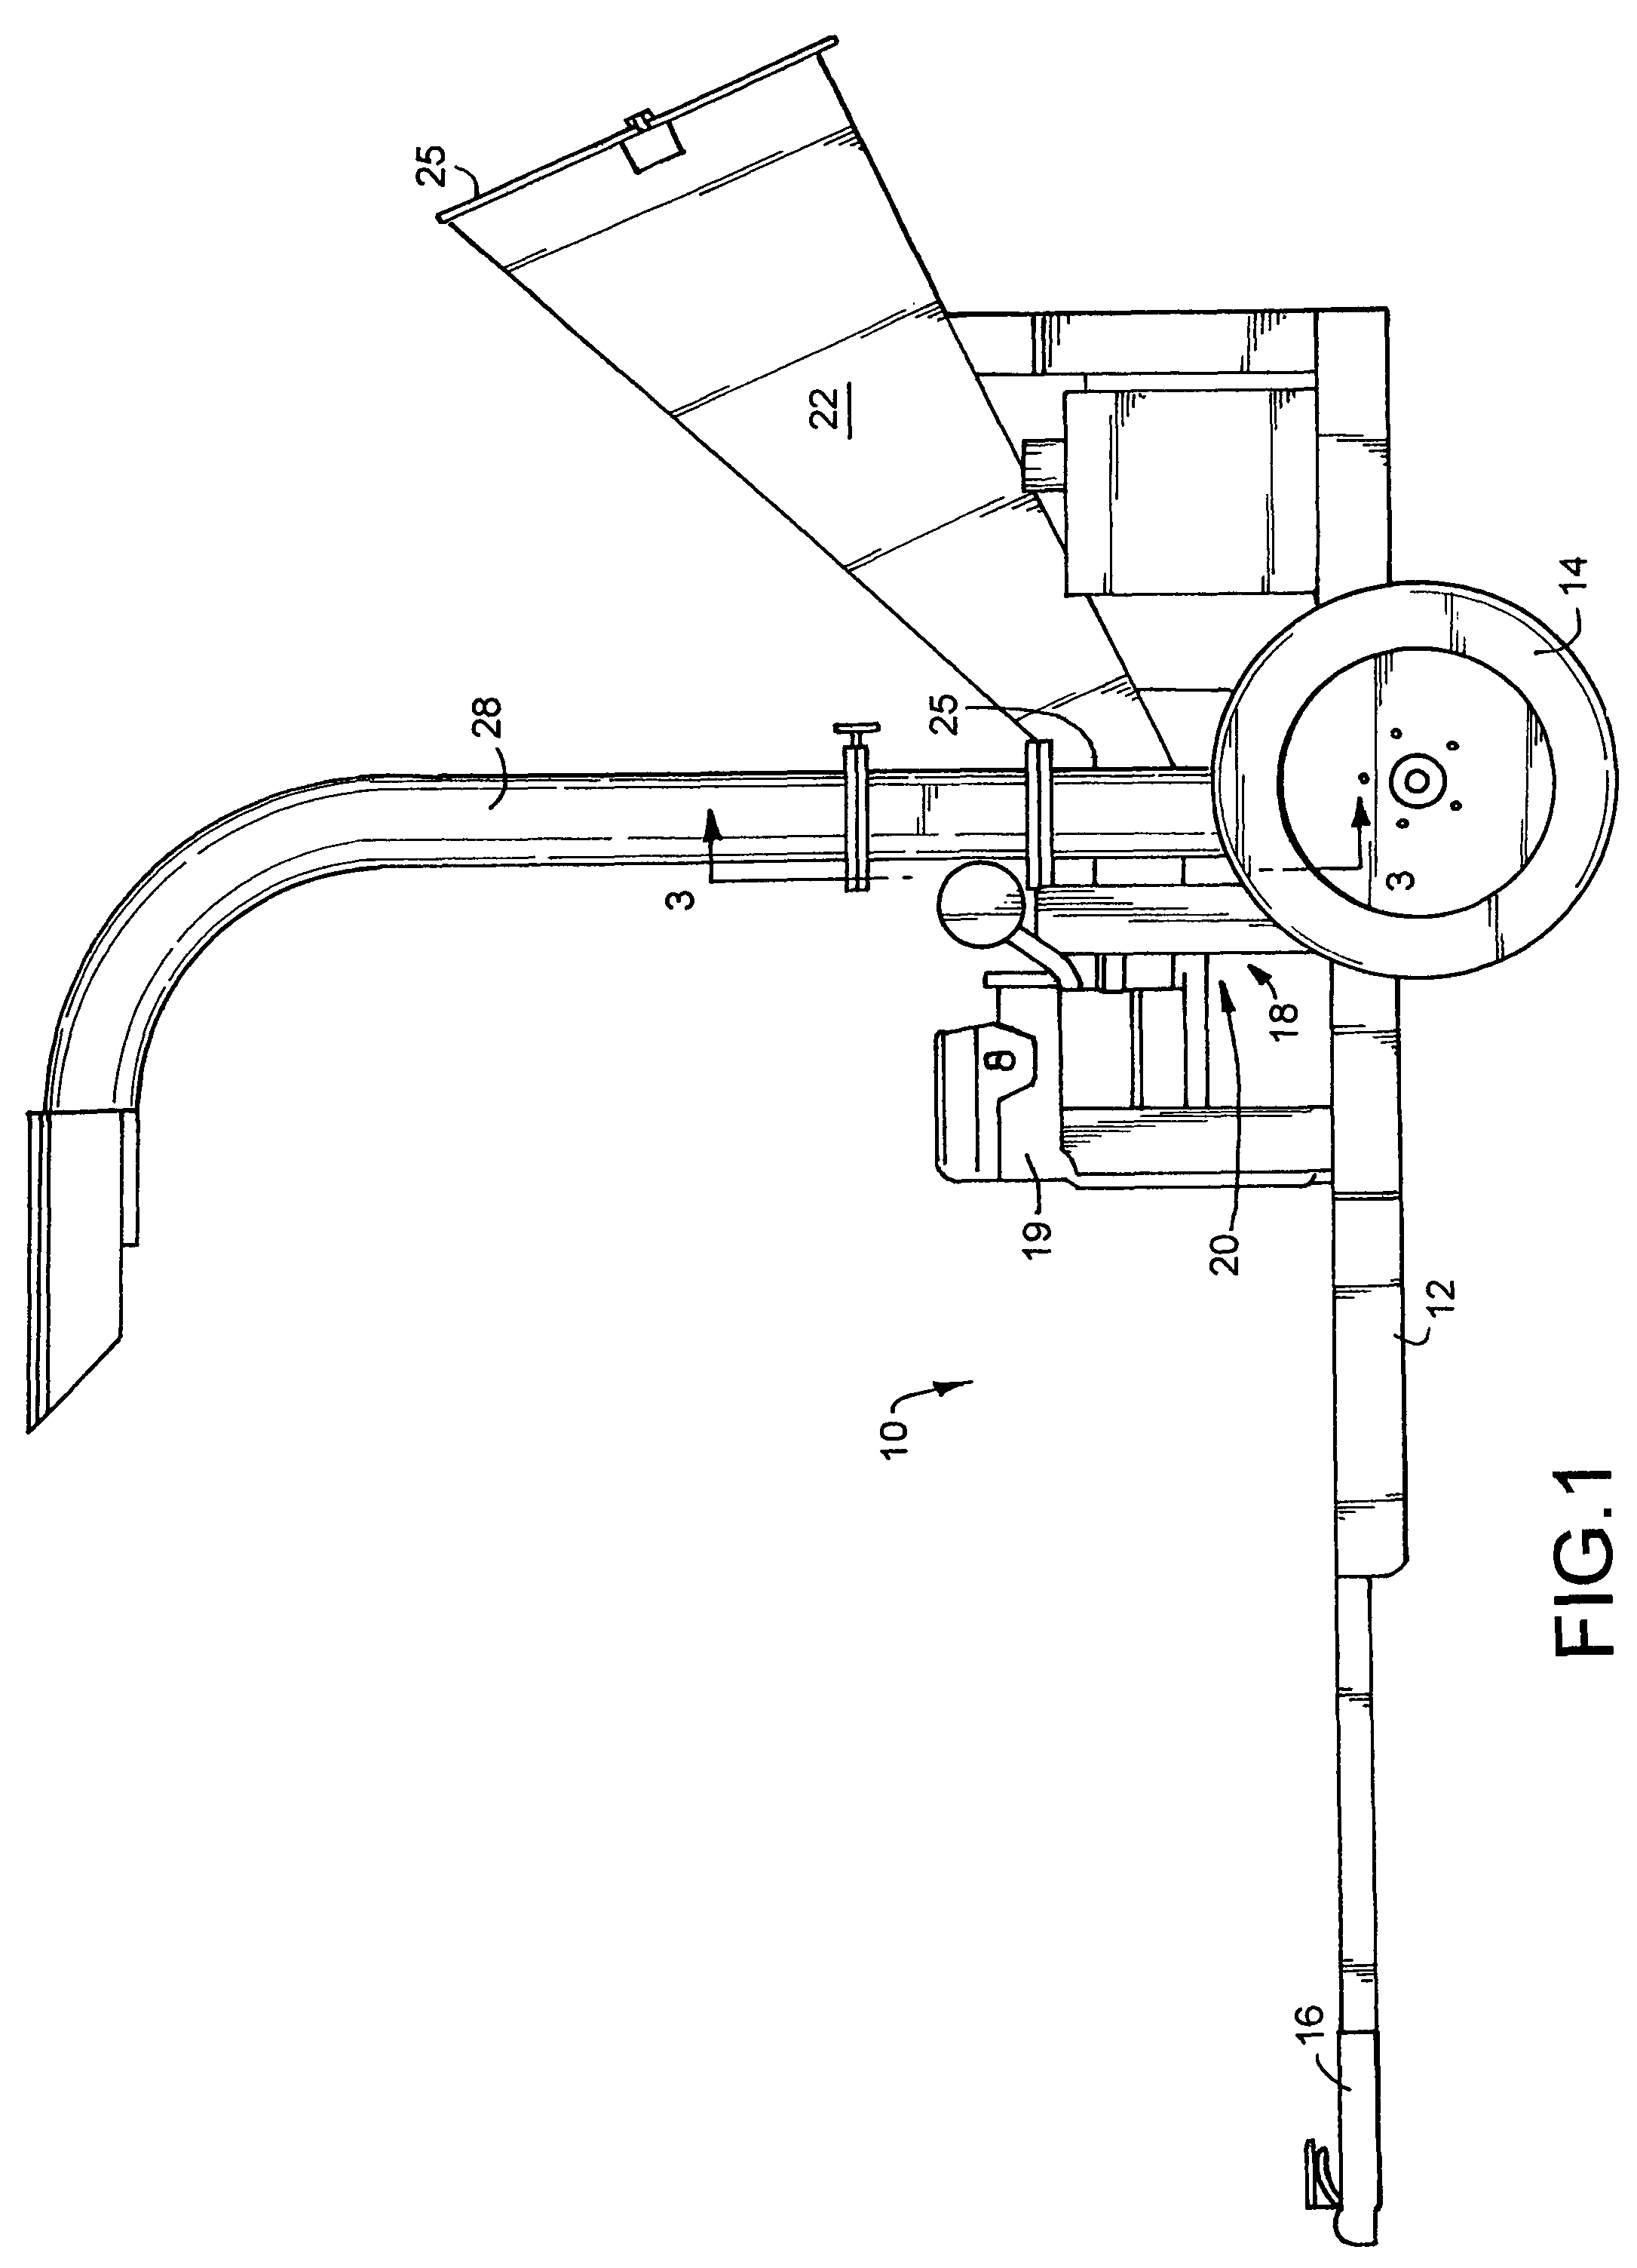 Portable rotary chipper apparatus